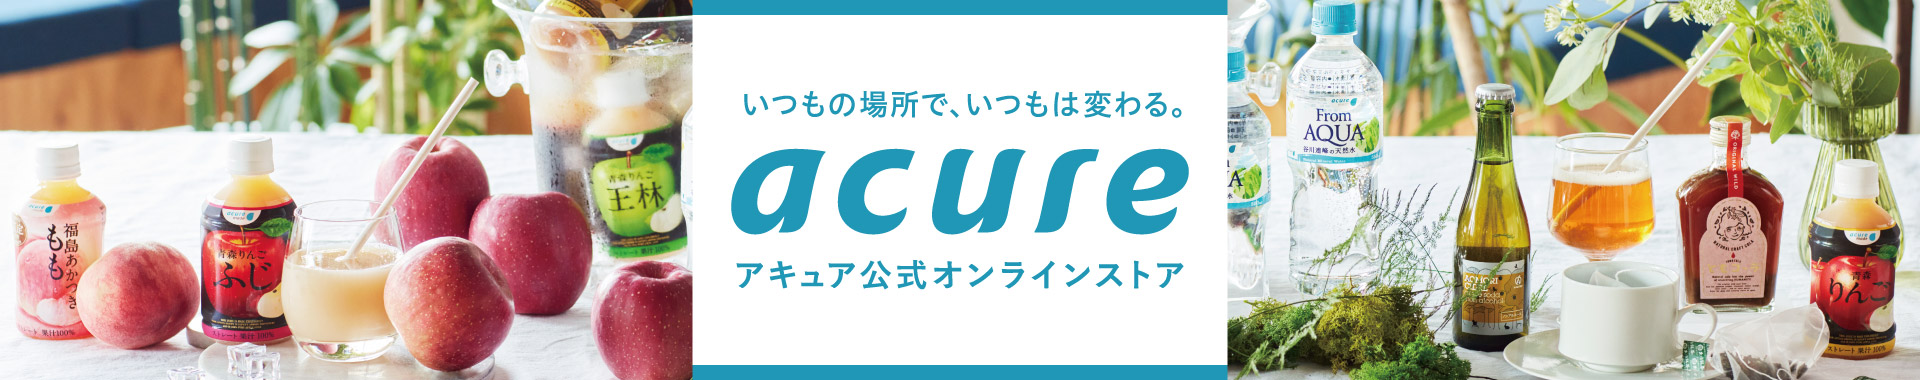 acure＜acure＞官方在線商店